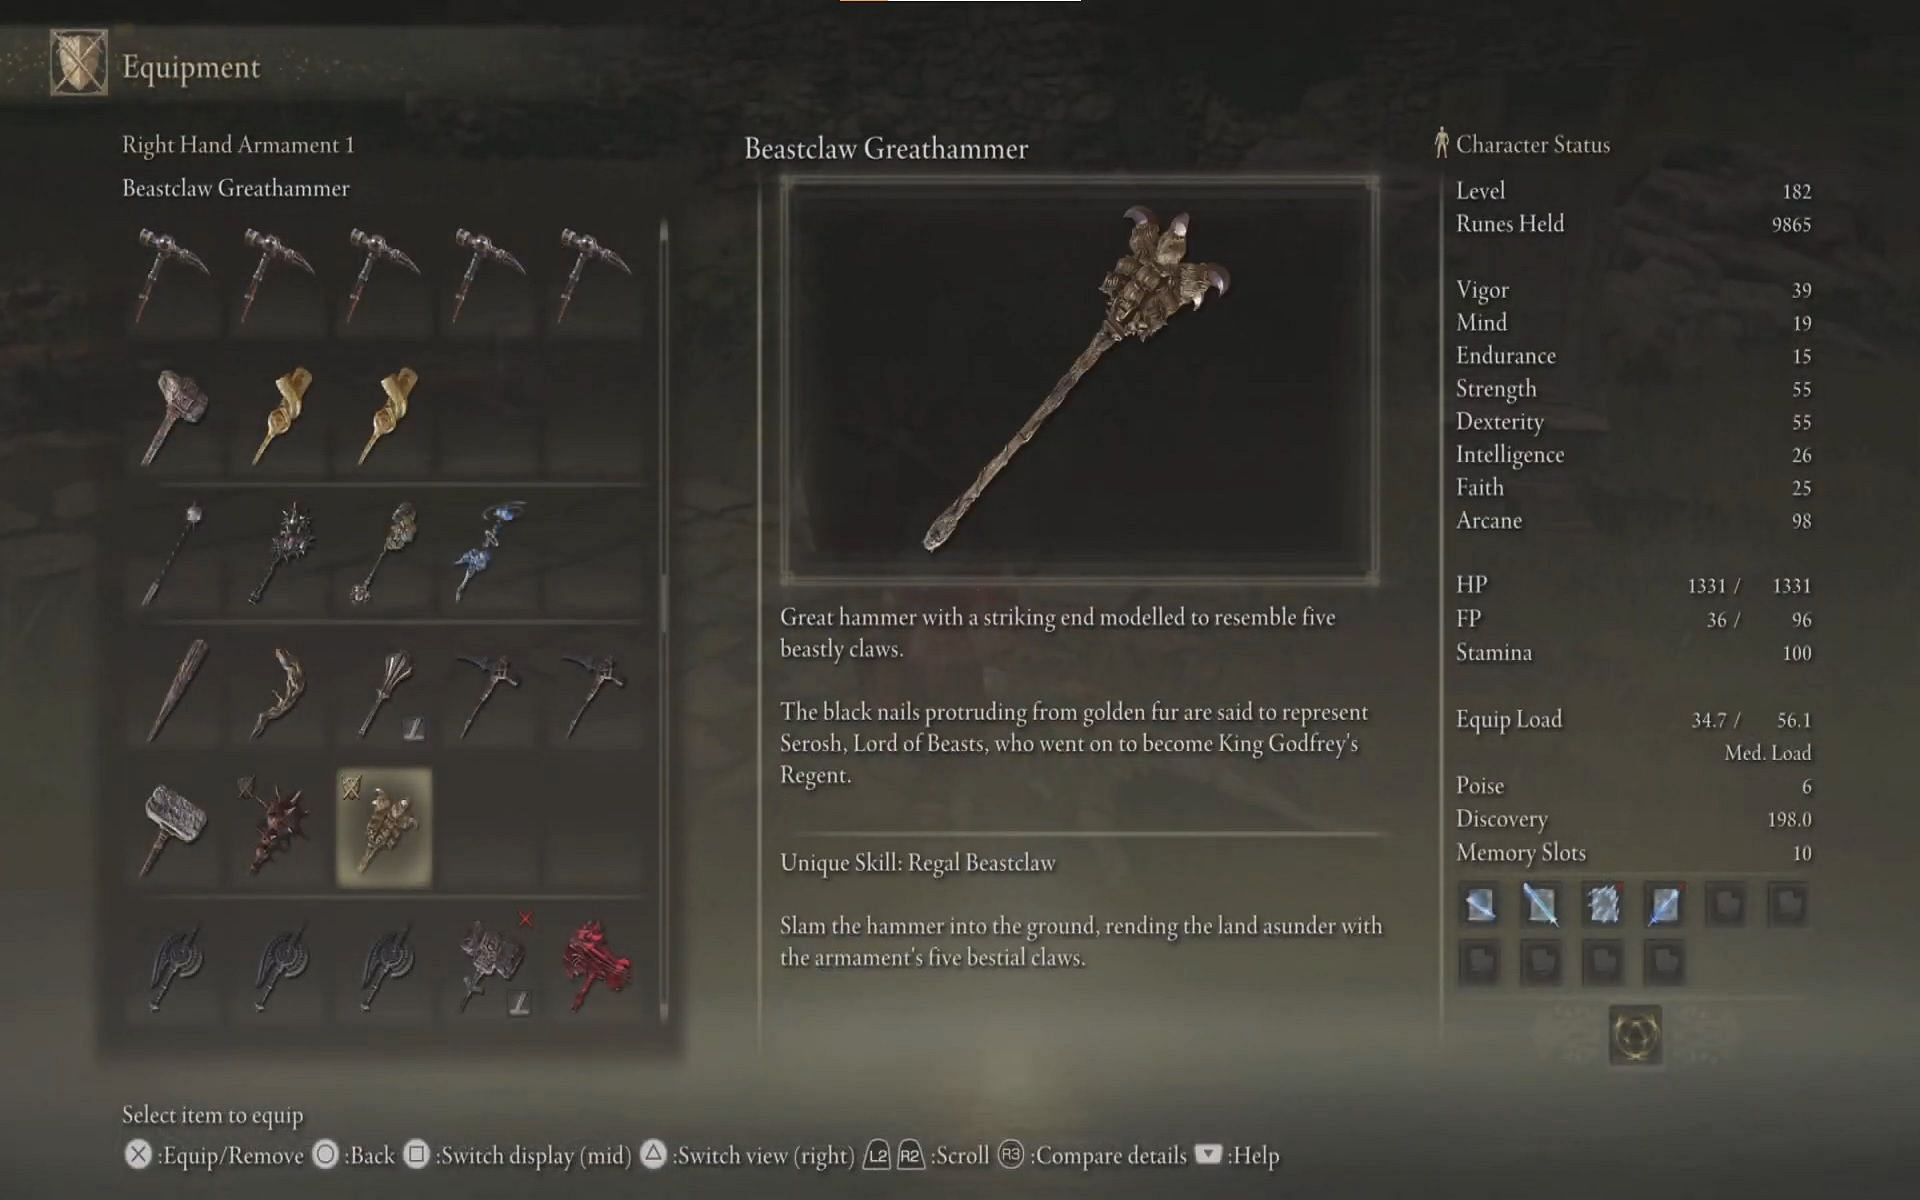 The Beastclaw Greathammer in Elden Ring (Image via Fredchuckdave/YouTube)